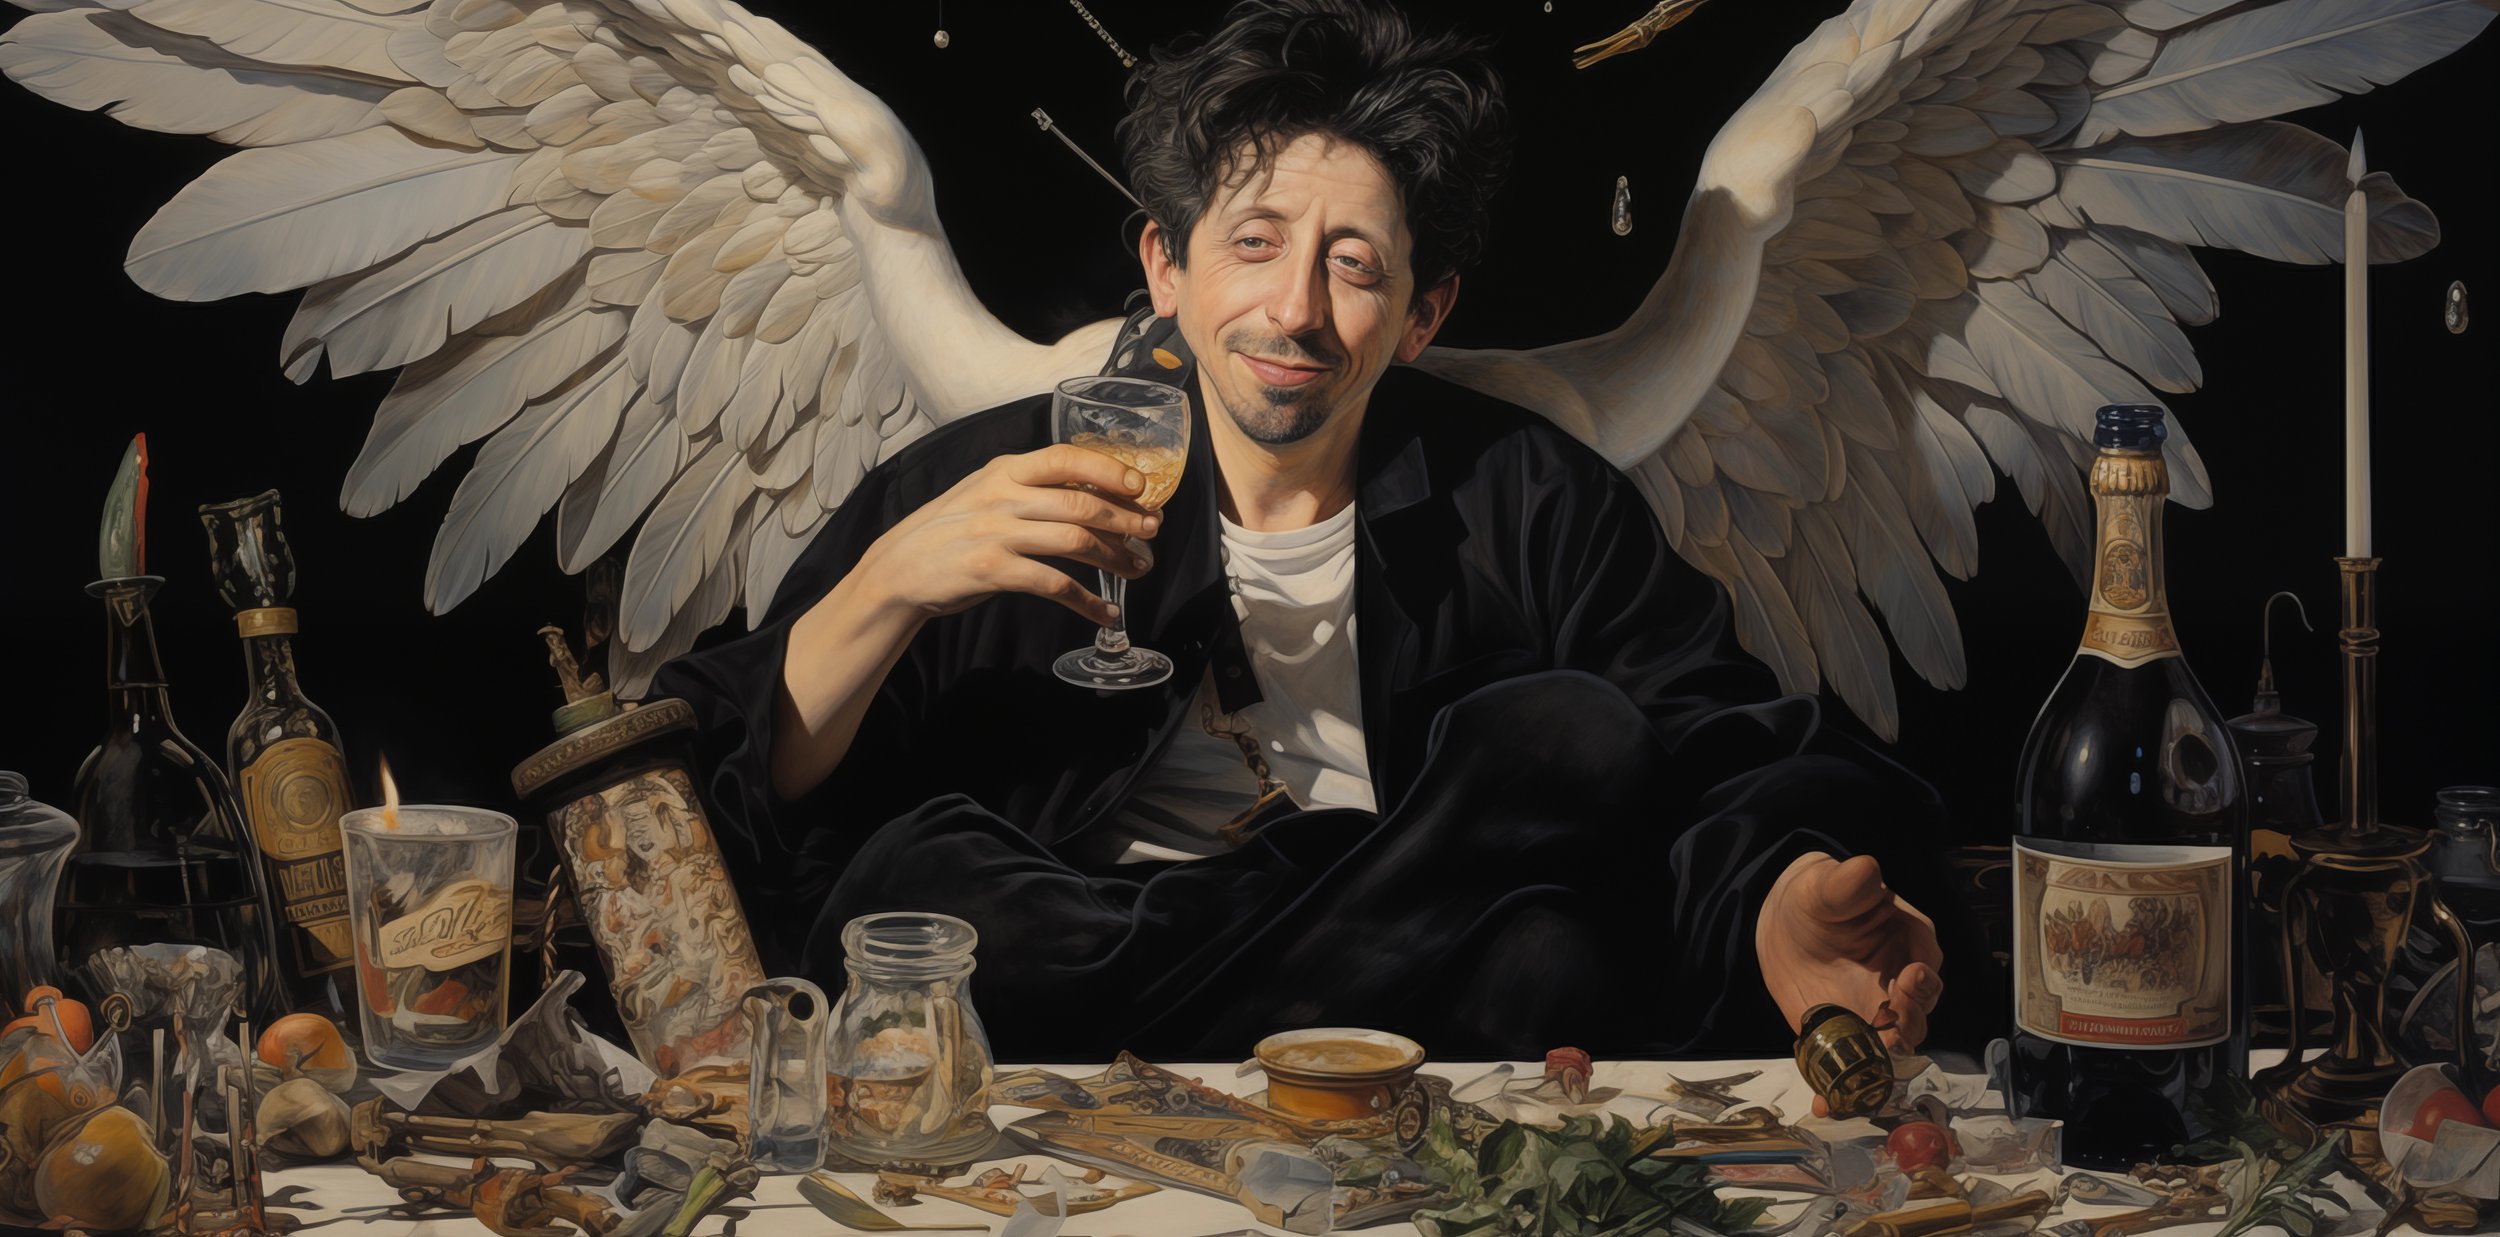 Dec. 8th, 2023: Shane MacGowan greets from musician heaven on day of his funeral. Rest in power Shane.